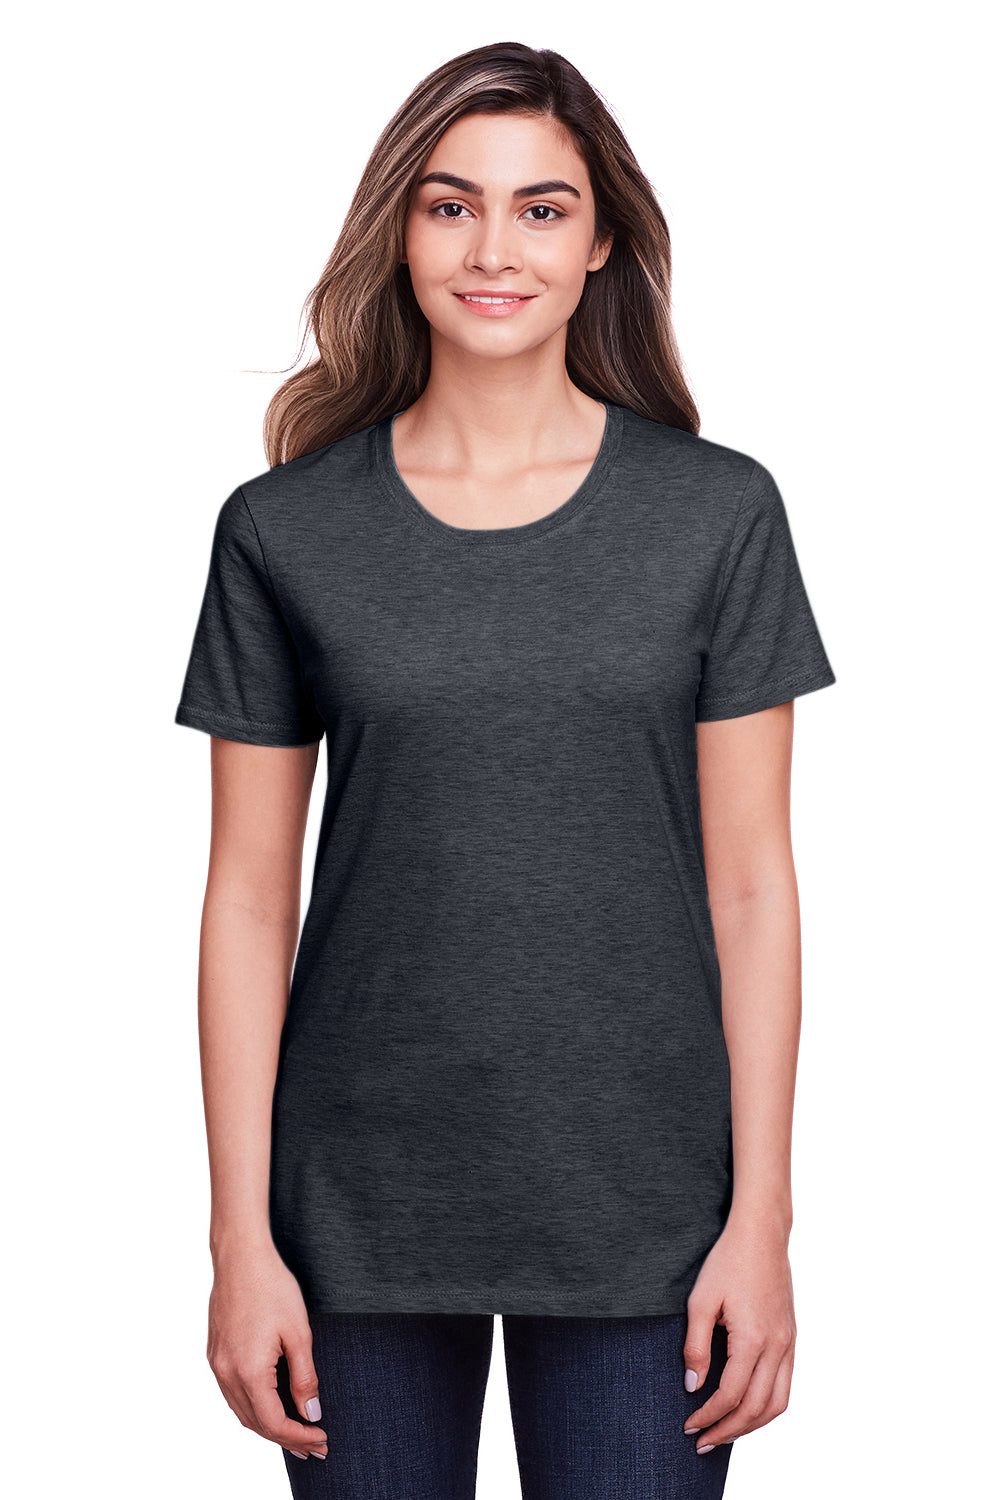 Fruit Of The Loom IC47WR Womens Iconic Short Sleeve Crewneck T-Shirt Heather Black Front